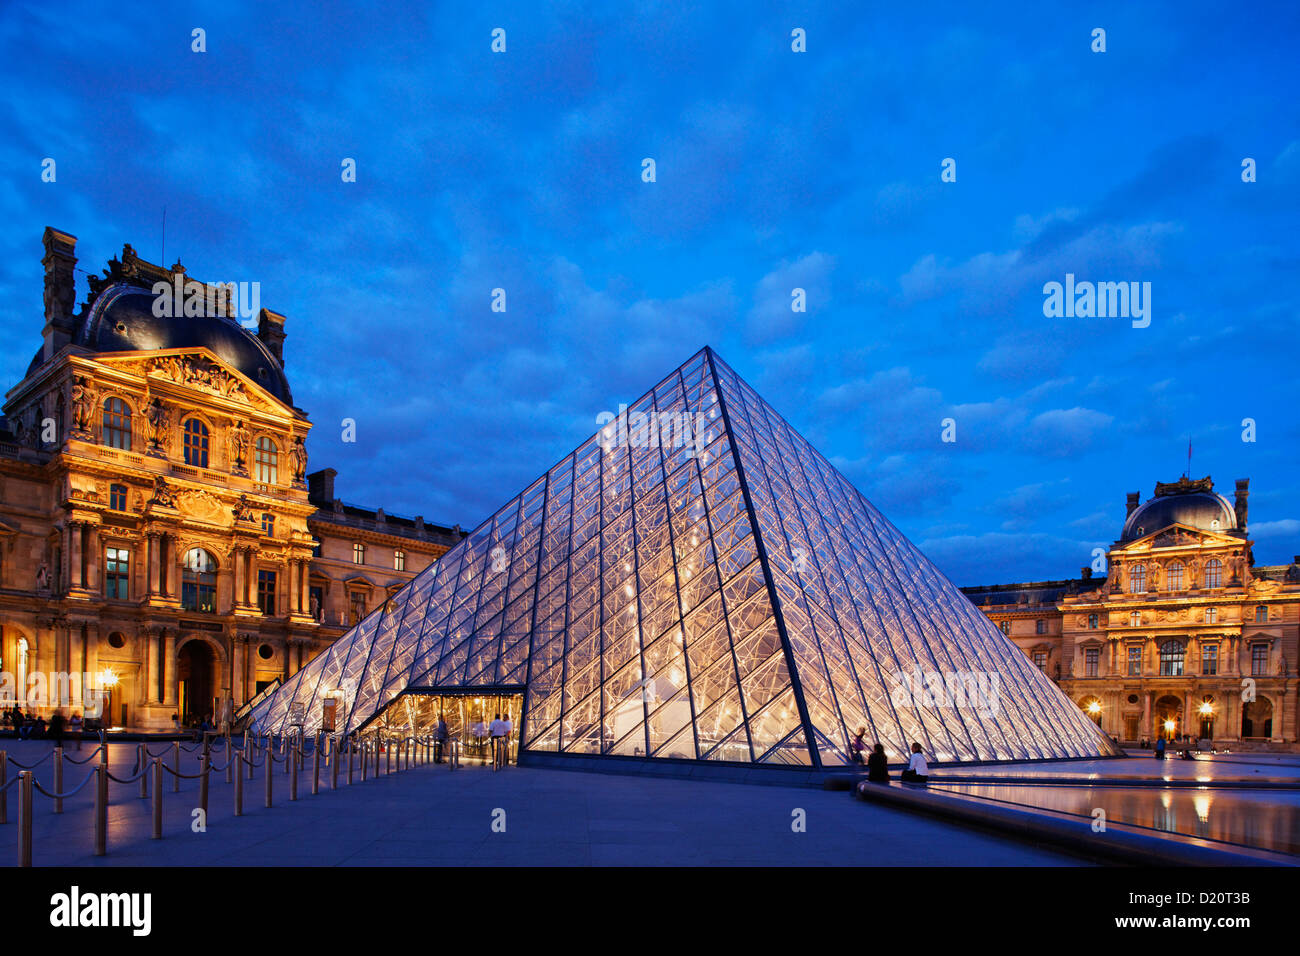 Louvre and the pyramid by I.M. Pei in the evening, Paris, France, Europe Stock Photo